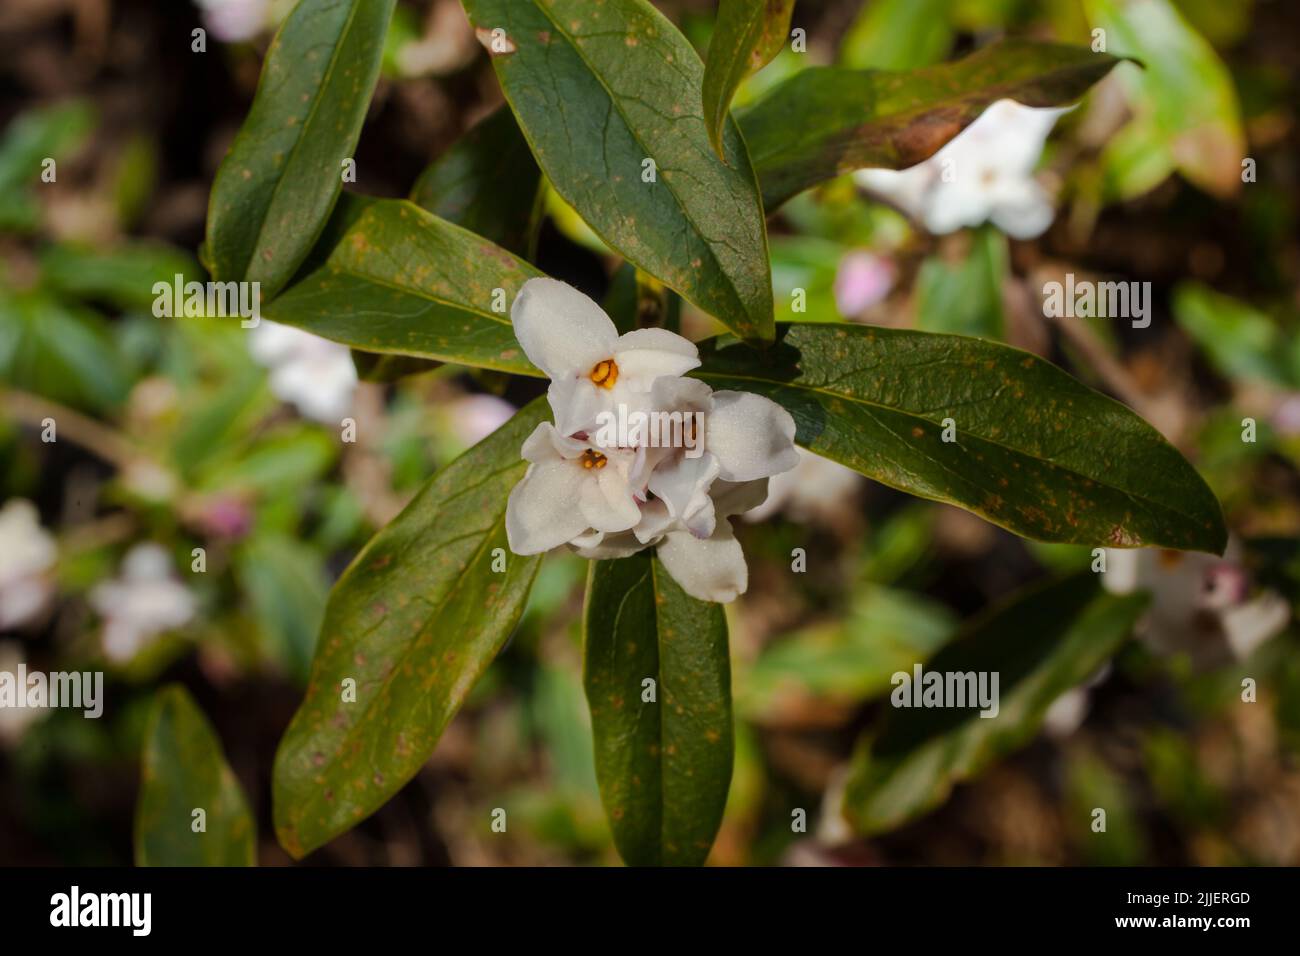 A Look at life in New Zealand: a walk around my organic, edible garden. Daphne flowers - not edible but a delightful smell. Stock Photo